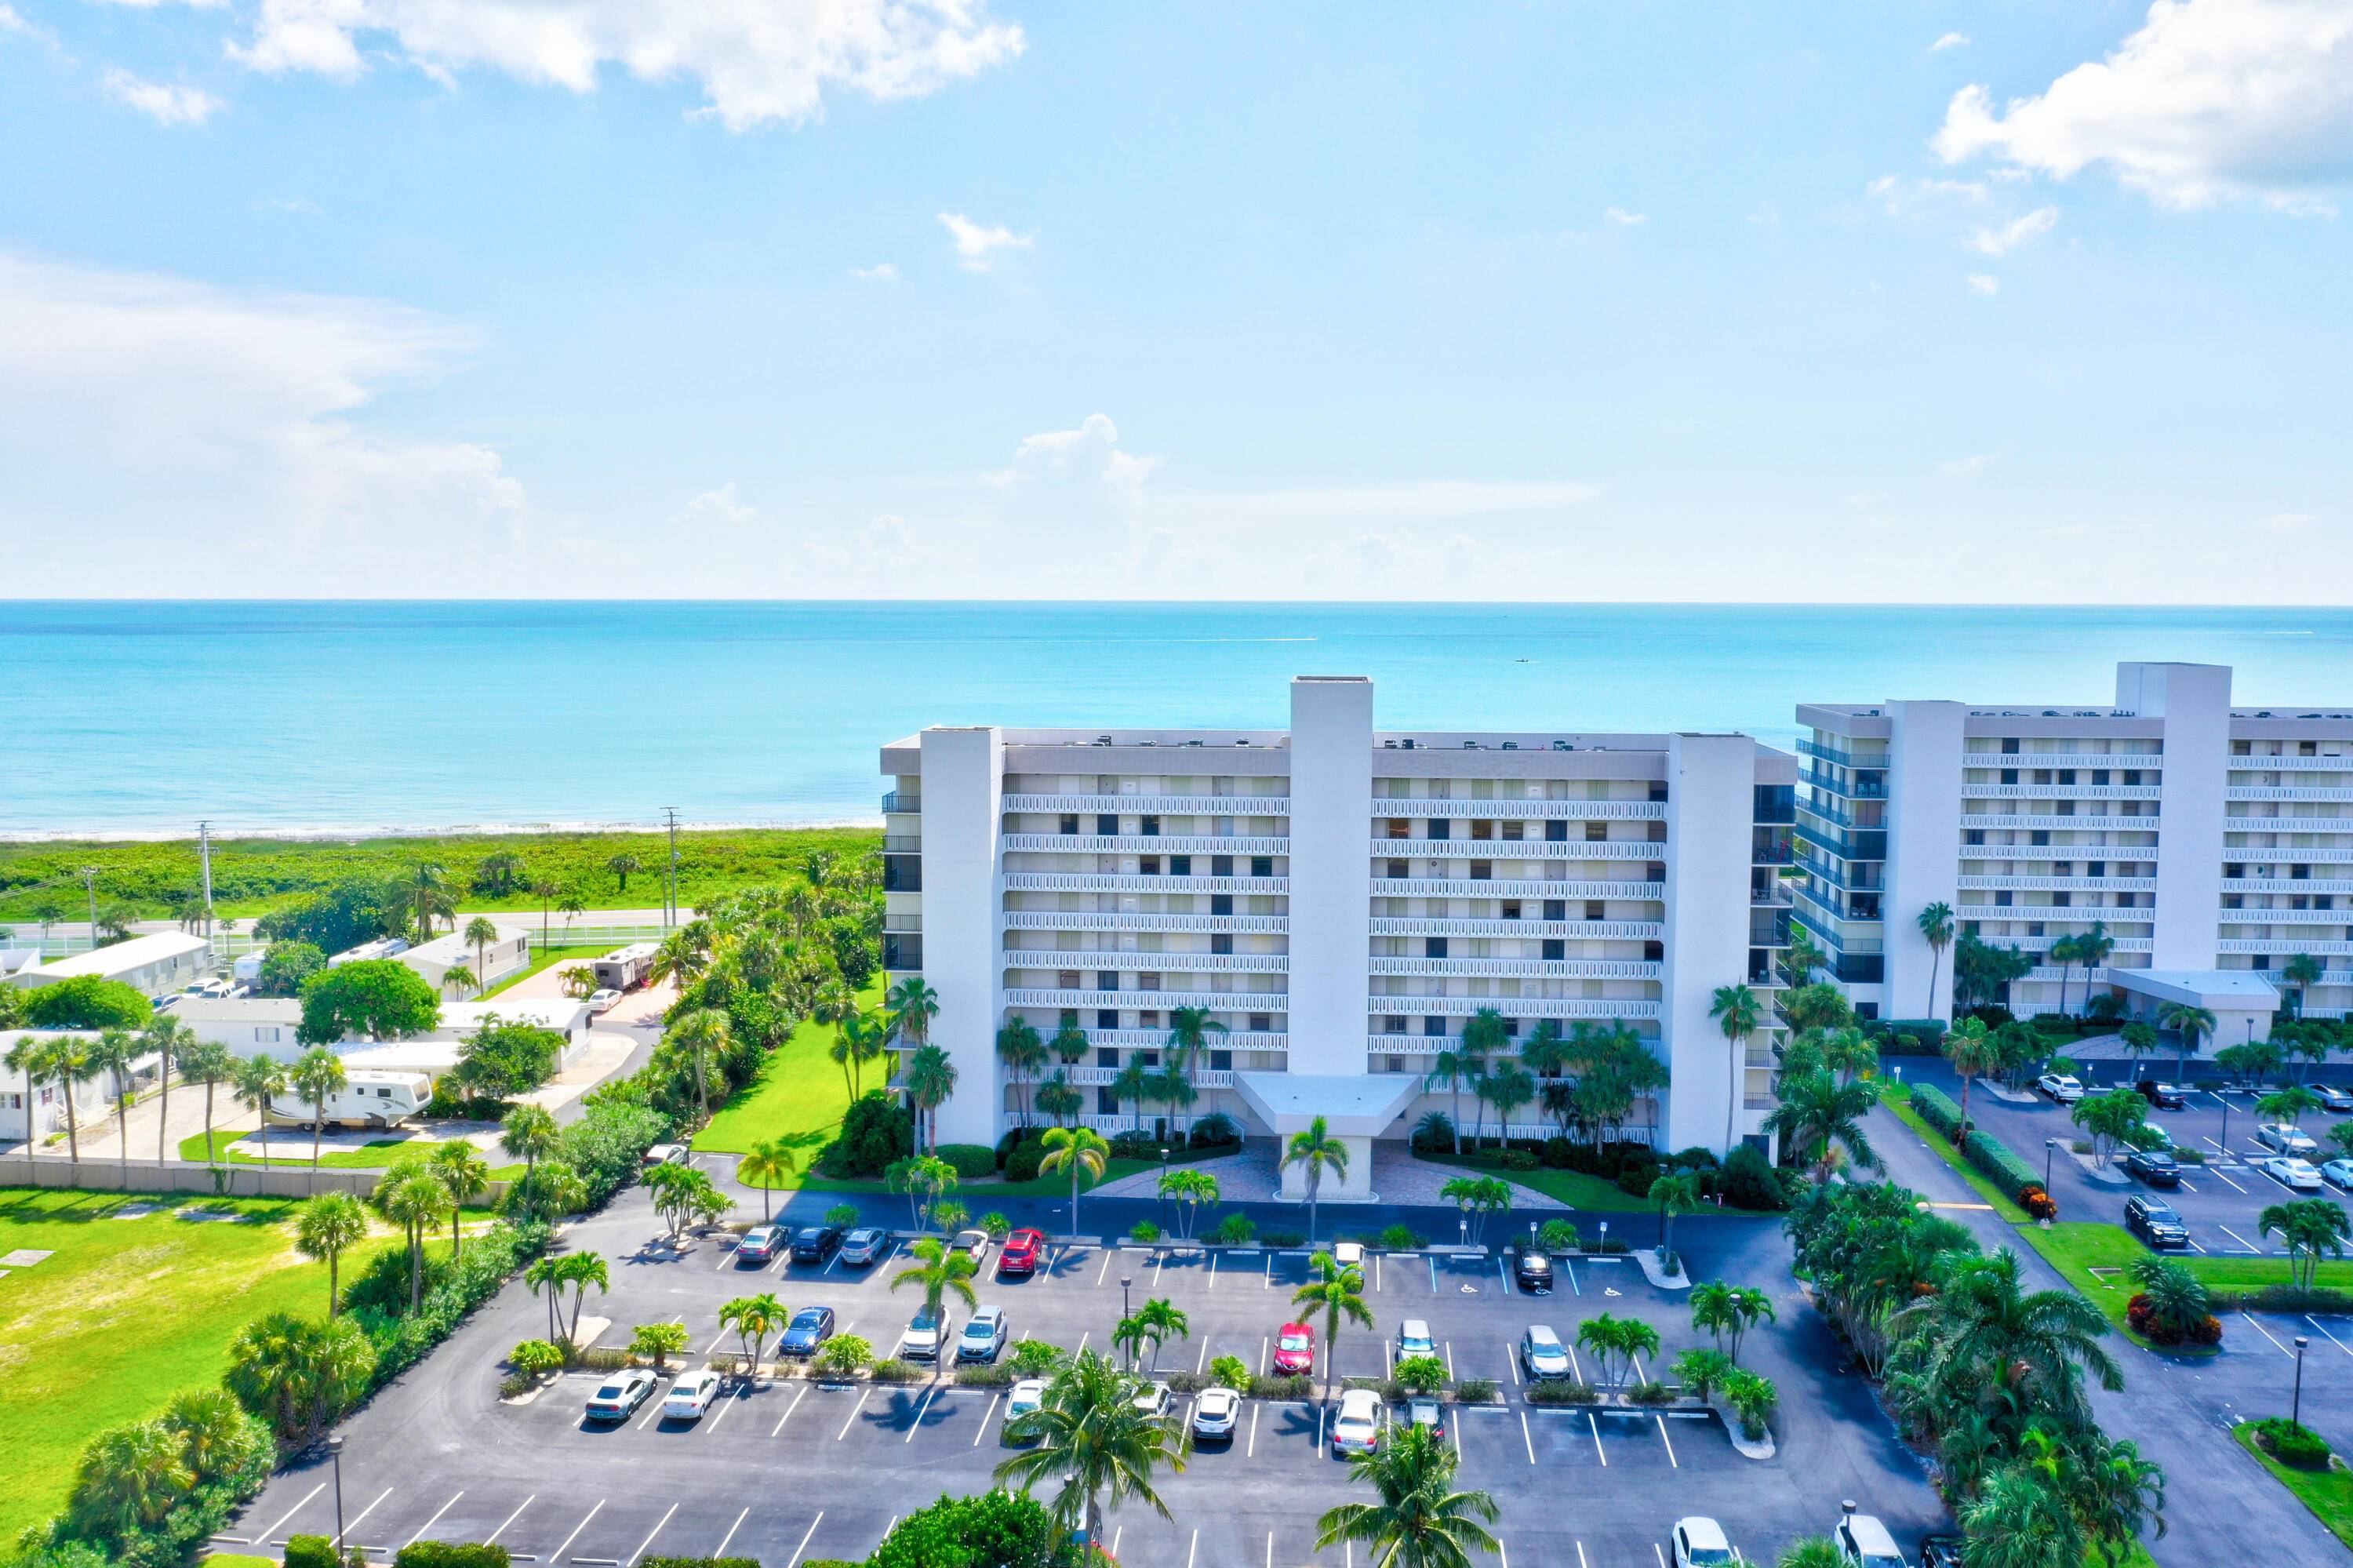 Prepare to be mesmerized by the breathtaking vistas of the majestic ocean that greet you at every turn in this exquisite two bedroom, two bath condominium.